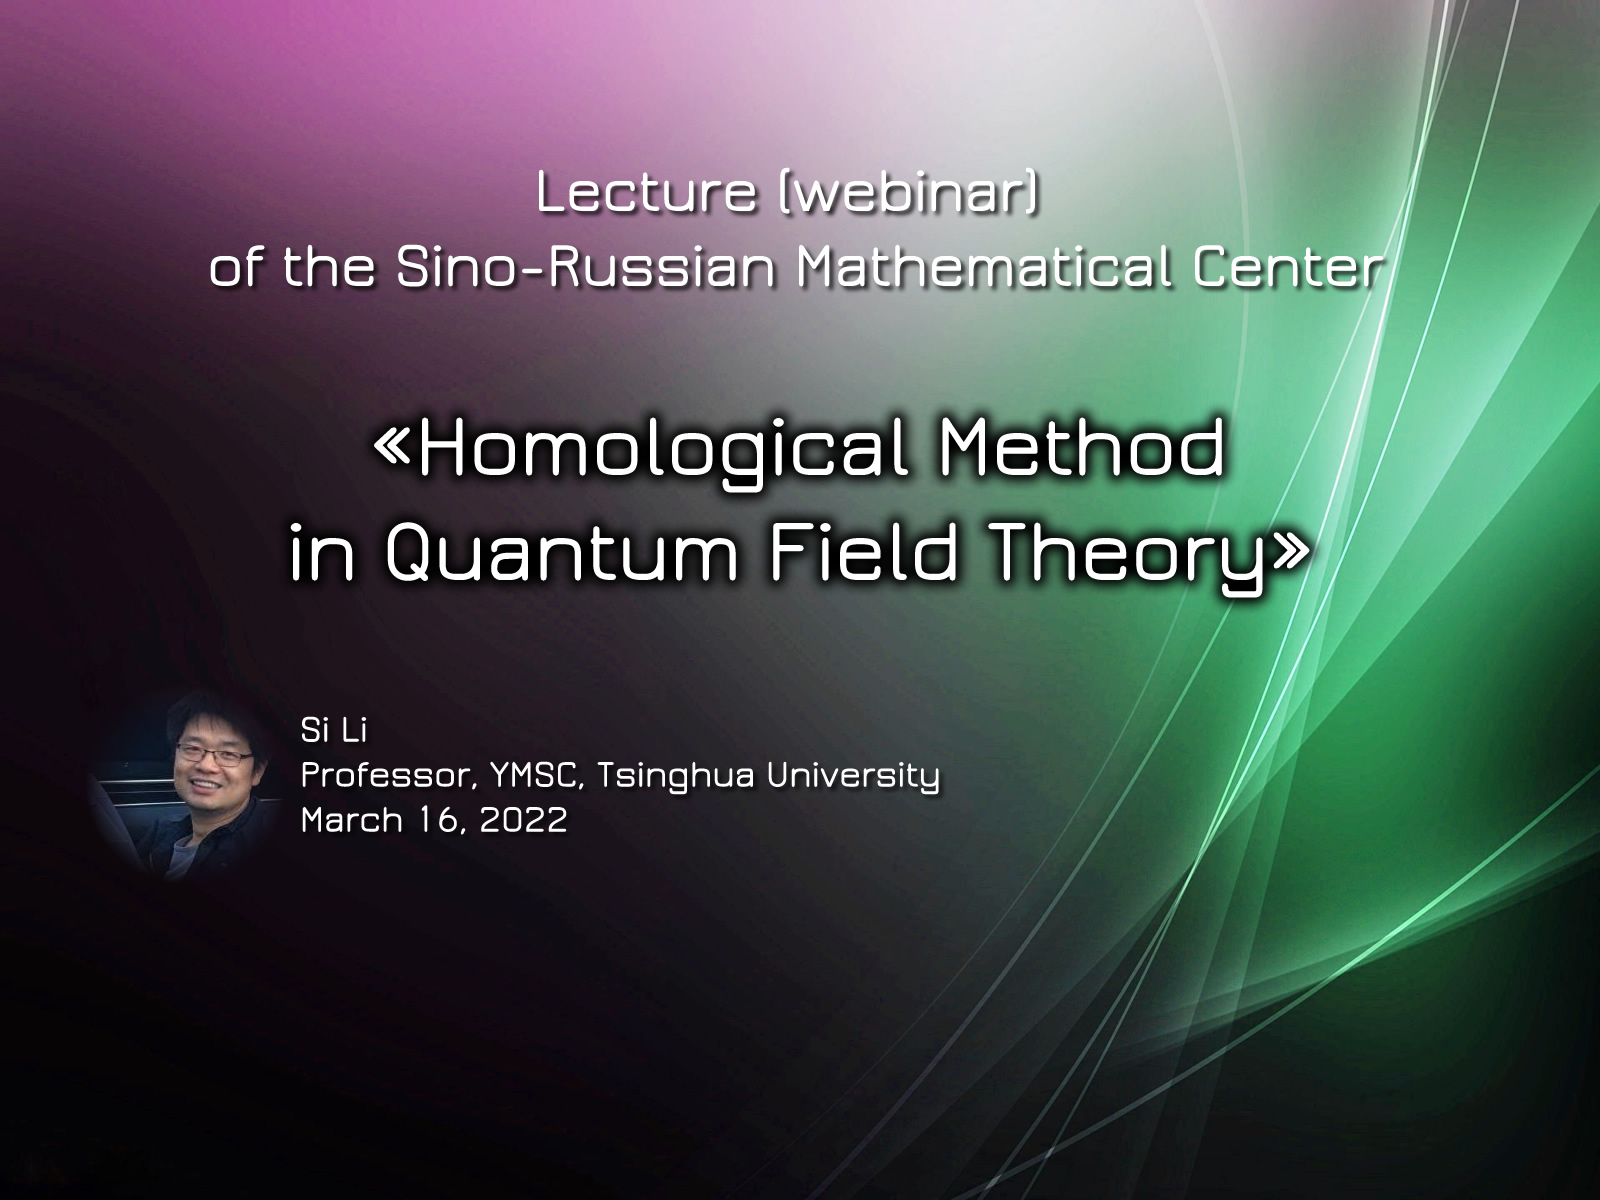 «Homological Method in Quantum Field Theory» 16.03.2022